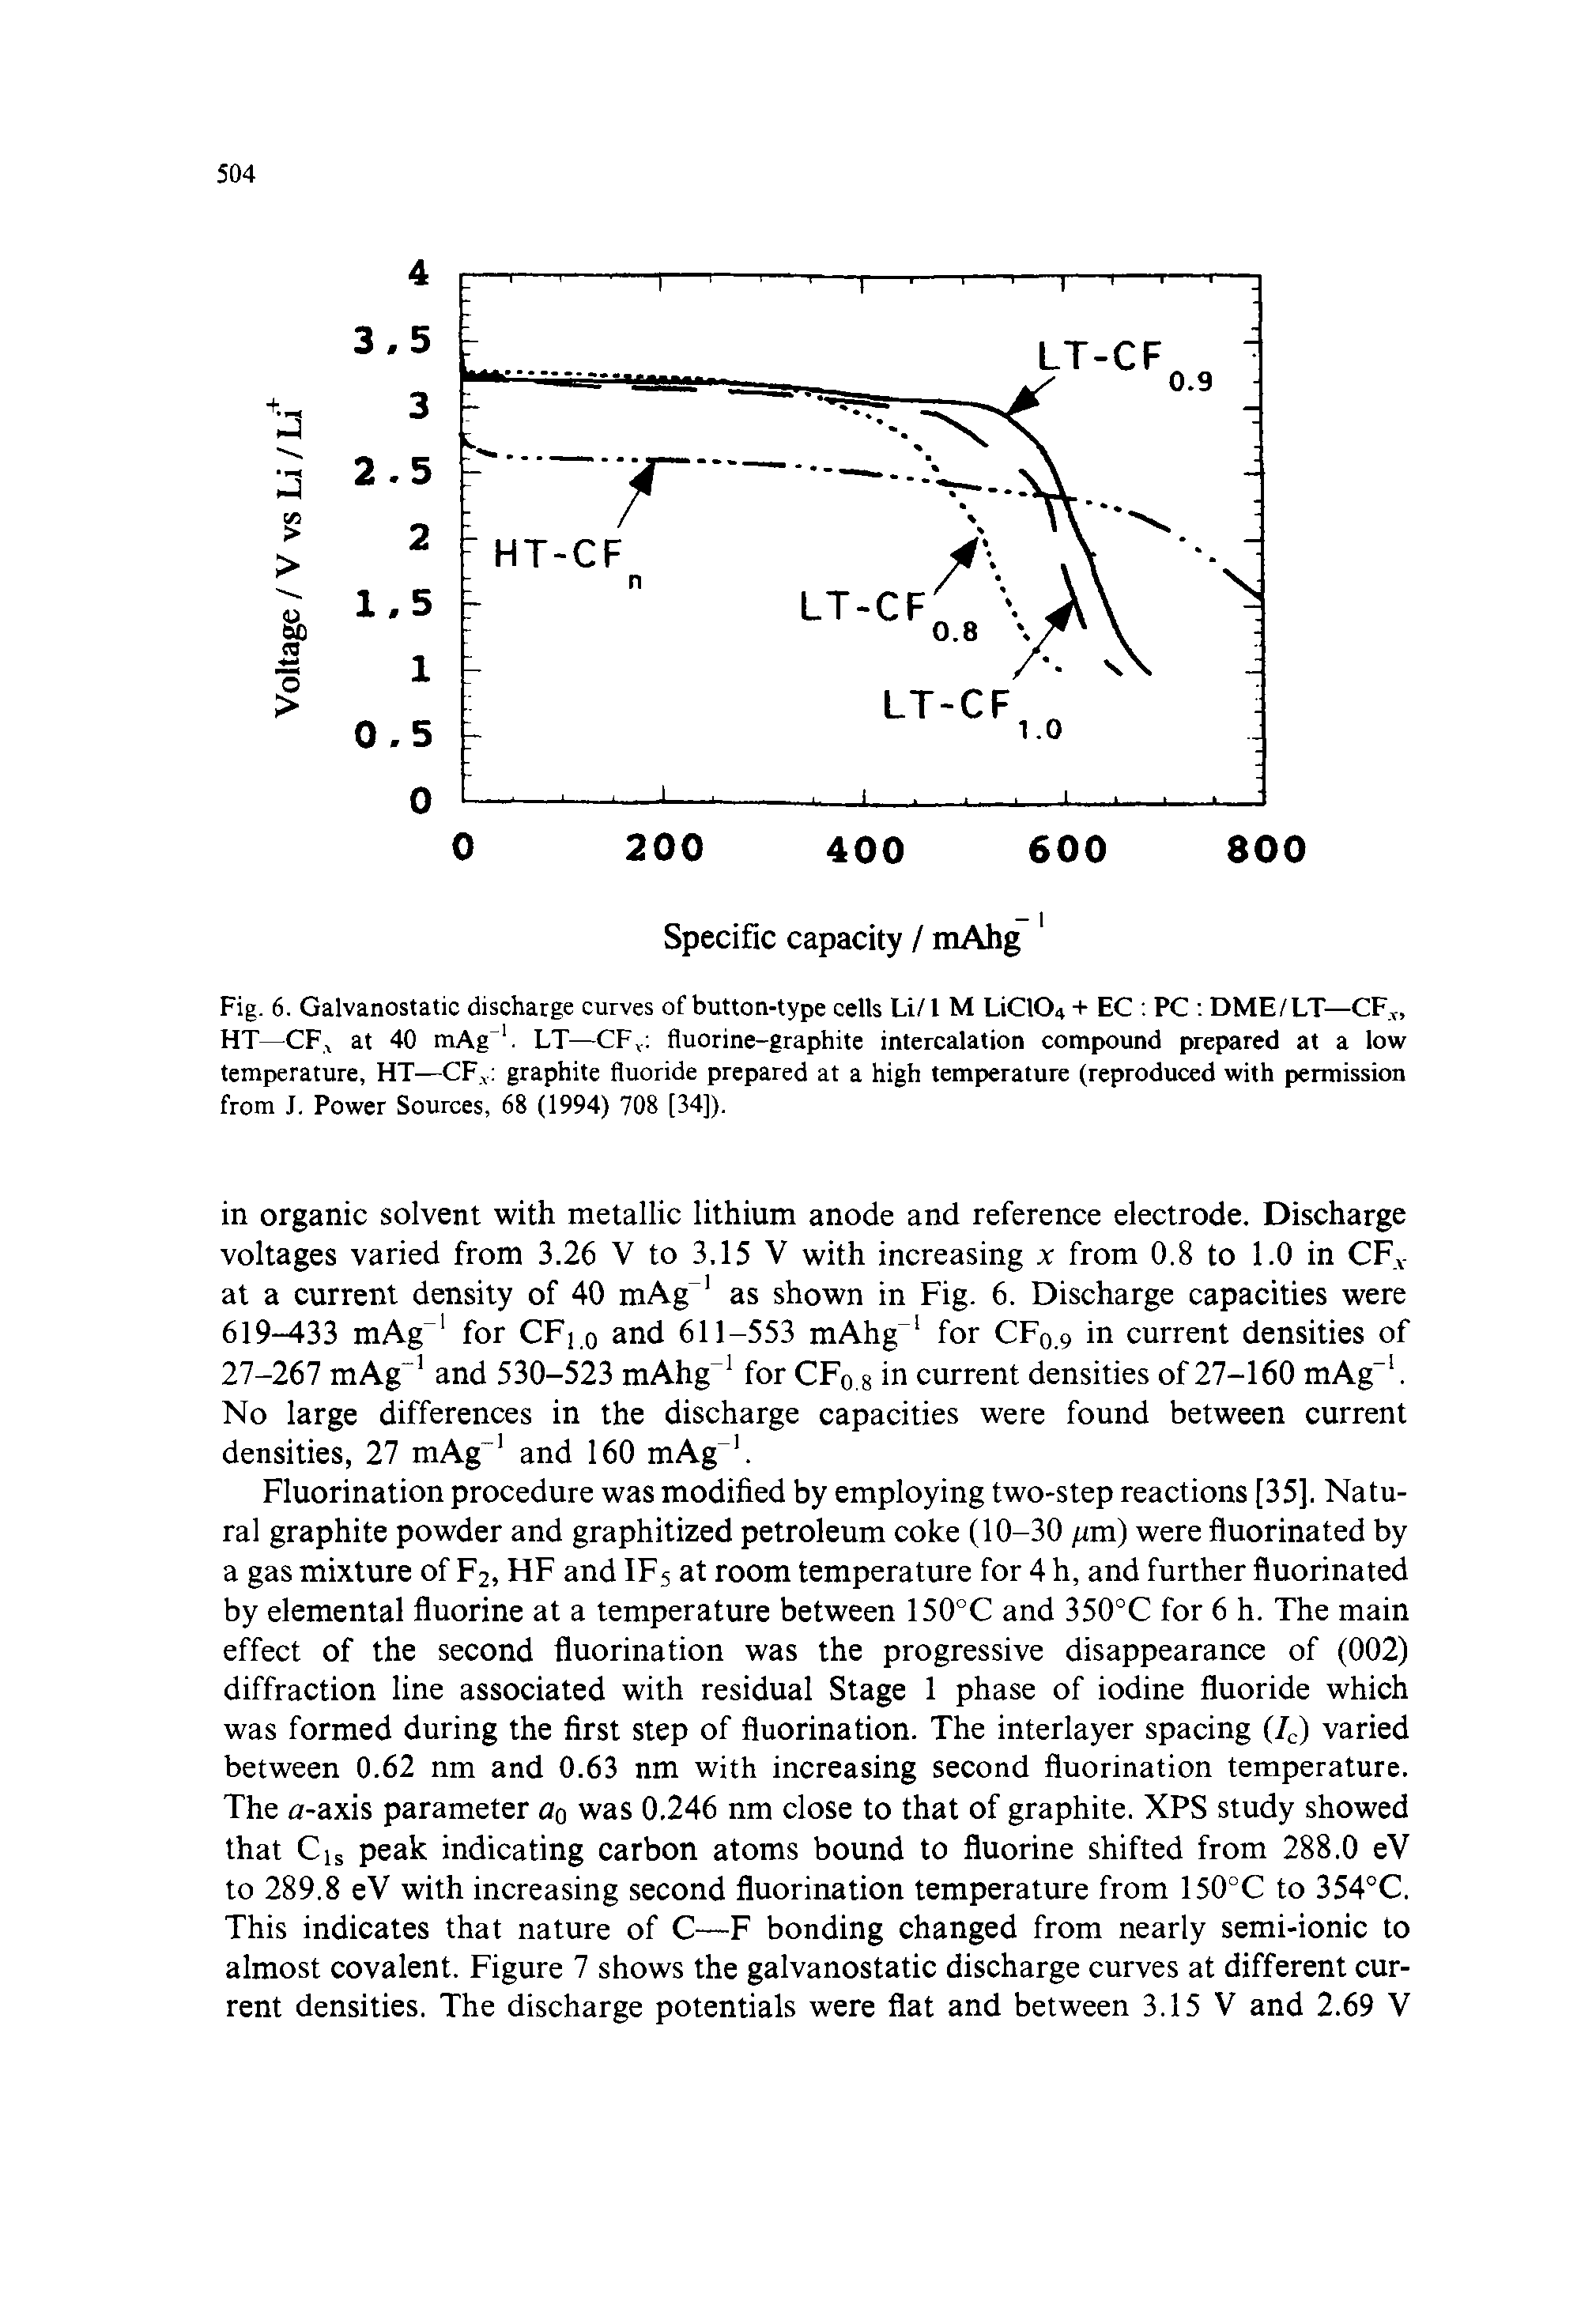 Fig. 6. Galvanostatic discharge curves of button-type cells Li/1 M L1CIO4 + EC PC DME/LT—CFV, HT—CF, at 40 mAg 1. LT—CFV fluorine-graphite intercalation compound prepared at a low temperature, HT—CFV graphite fluoride prepared at a high temperature (reproduced with permission from J. Power Sources, 68 (1994) 708 [34]).